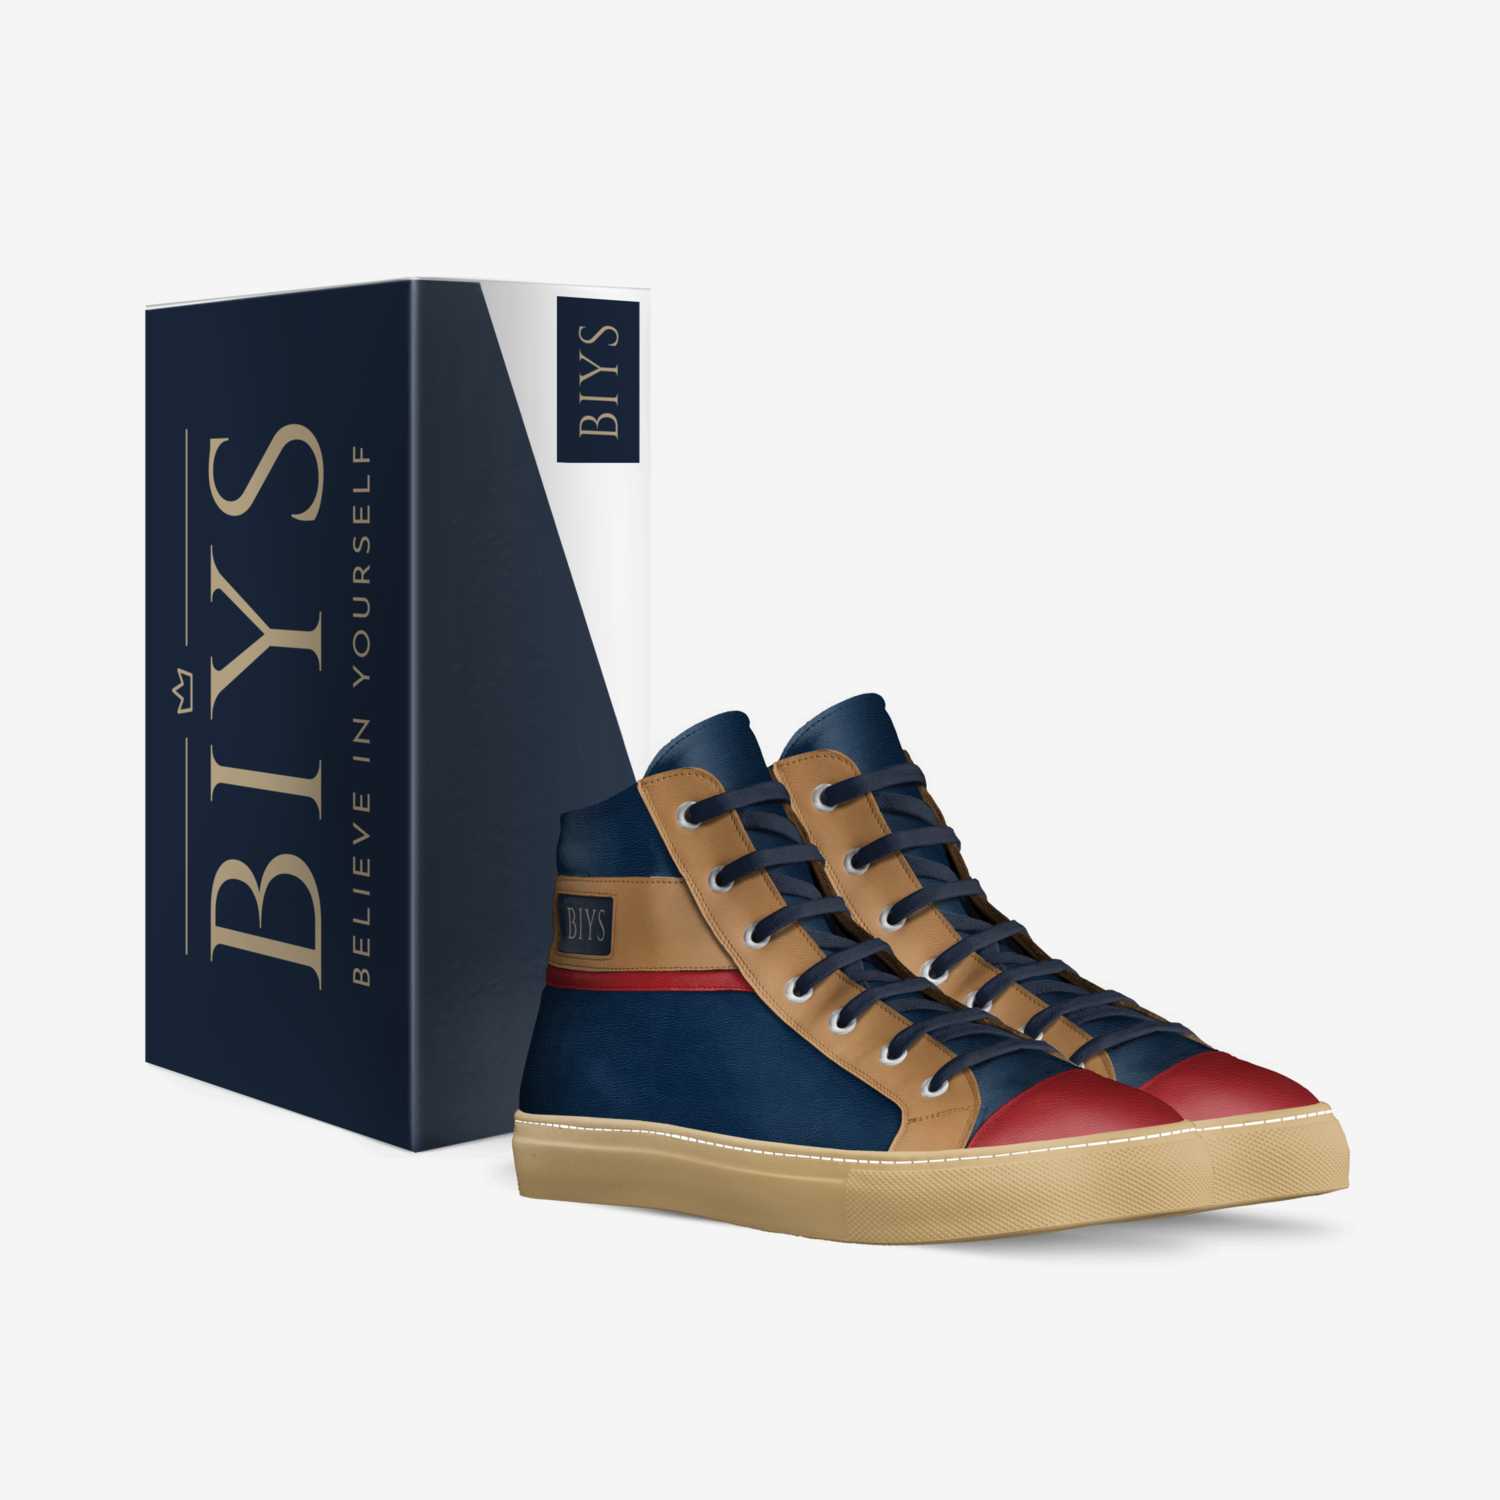 BIYS custom made in Italy shoes by Britney Smith | Box view